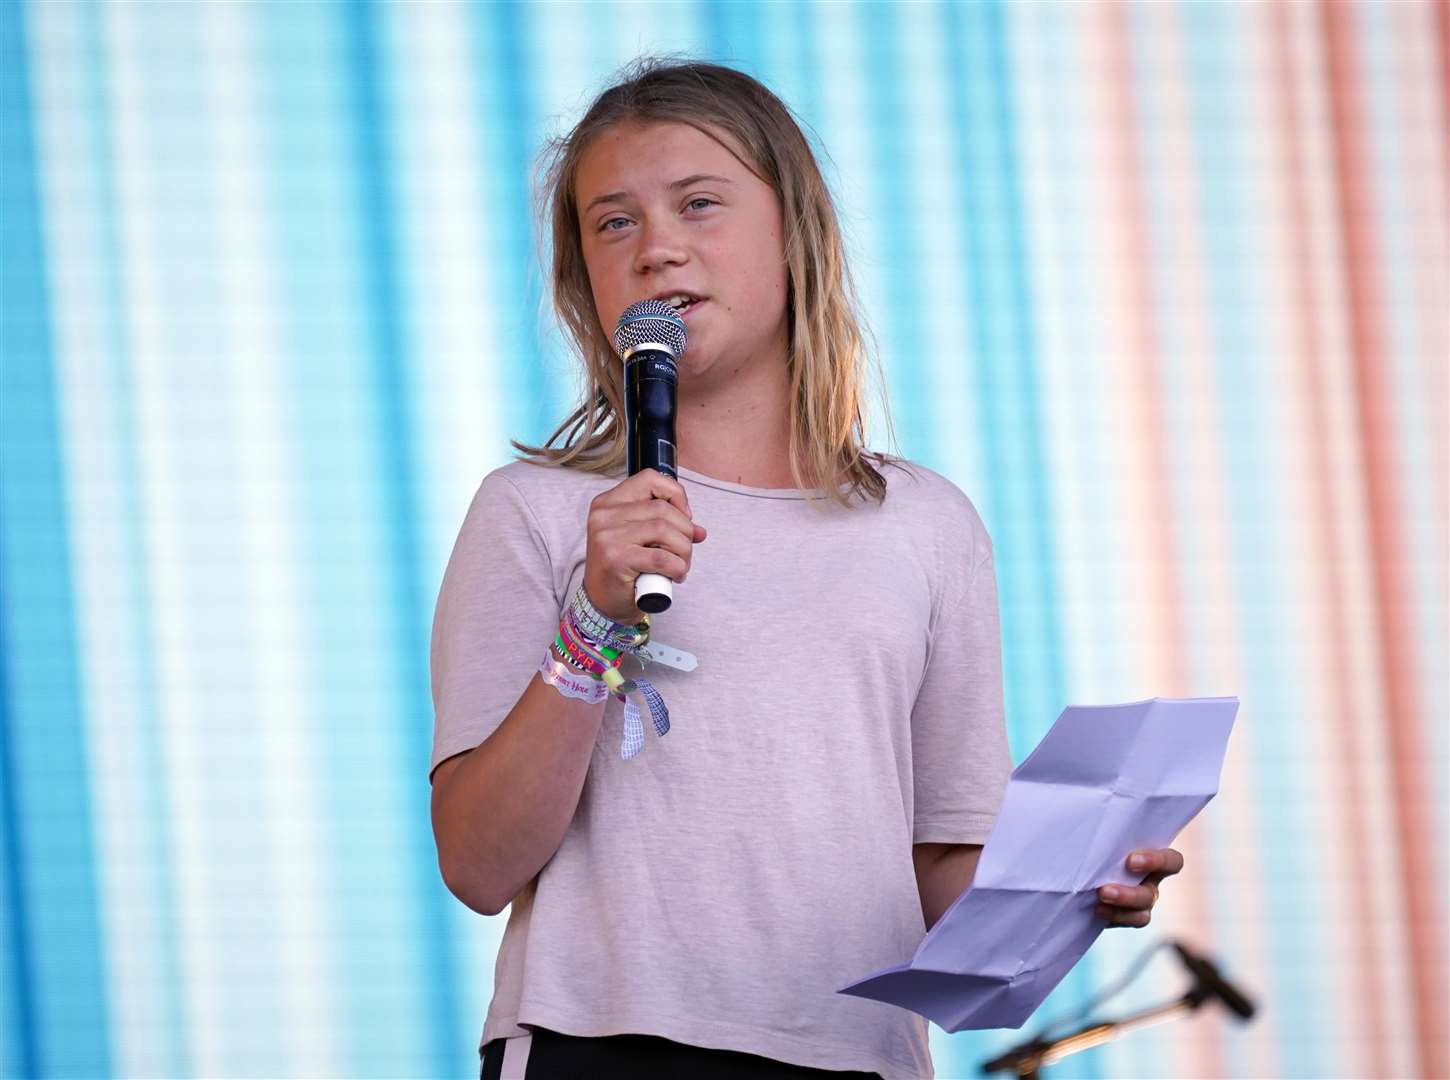 Climate activist Greta Thunberg had been due to speak at this year’s Edinburgh International Book Festival but pulled out (Yui Mok/PA)